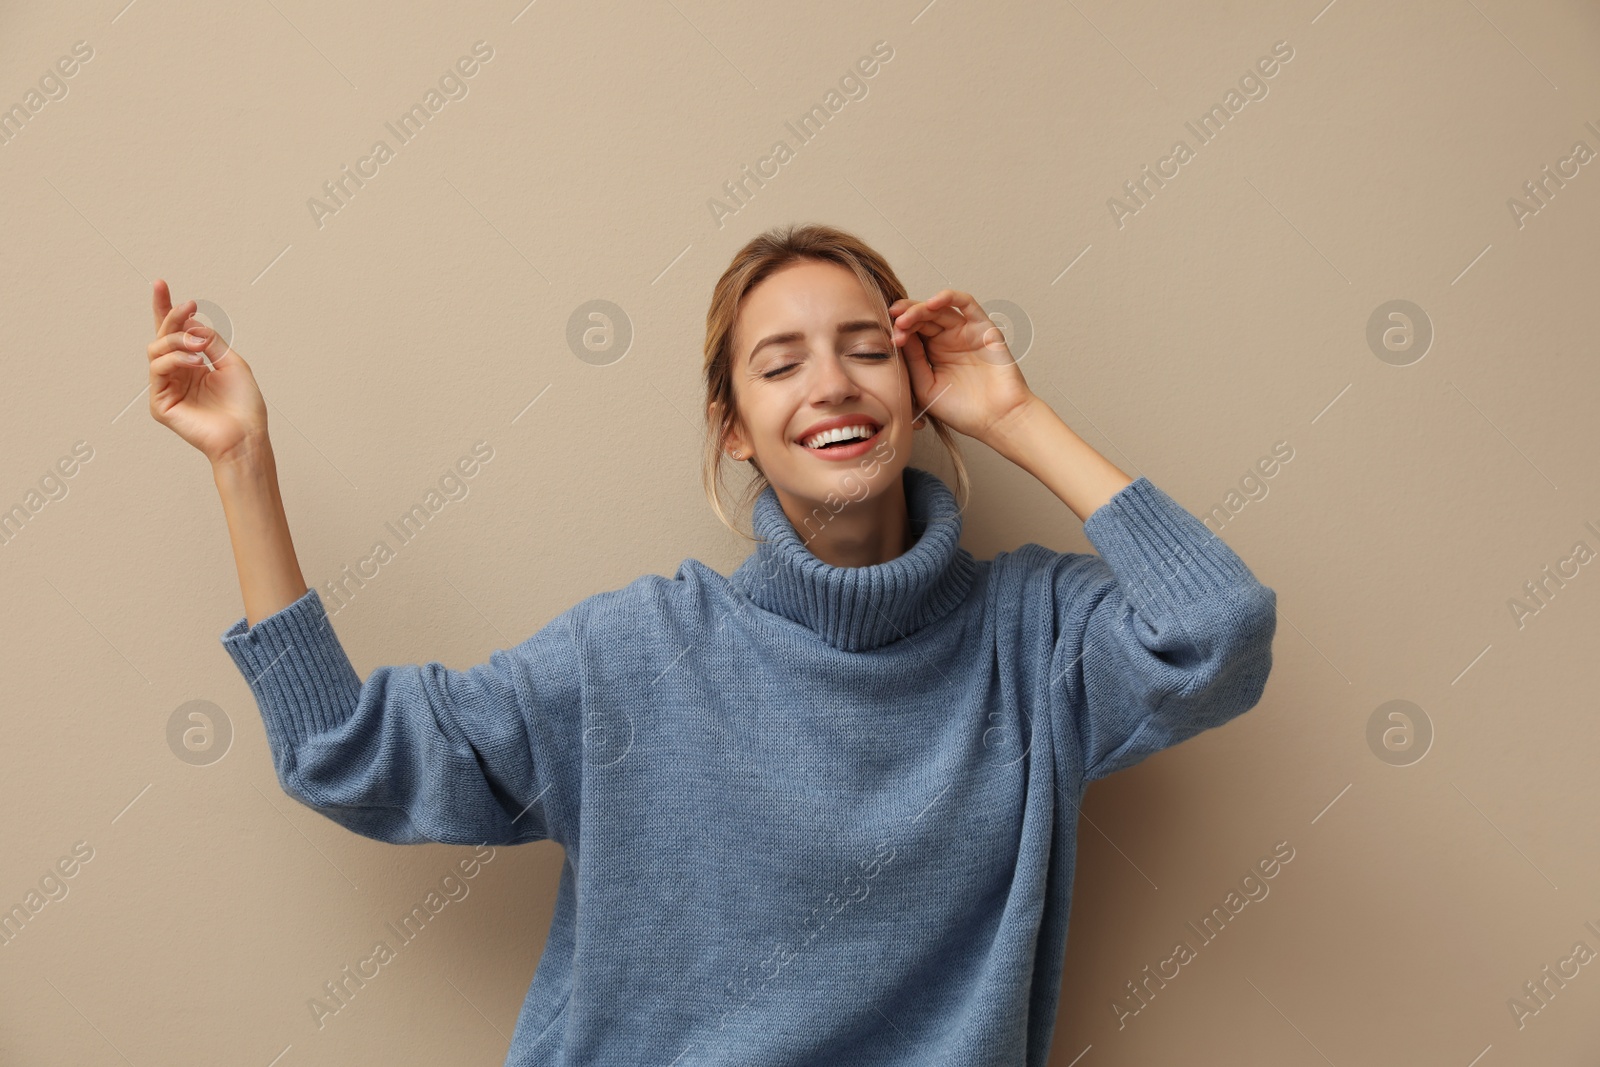 Photo of Beautiful young woman wearing knitted sweater on beige background